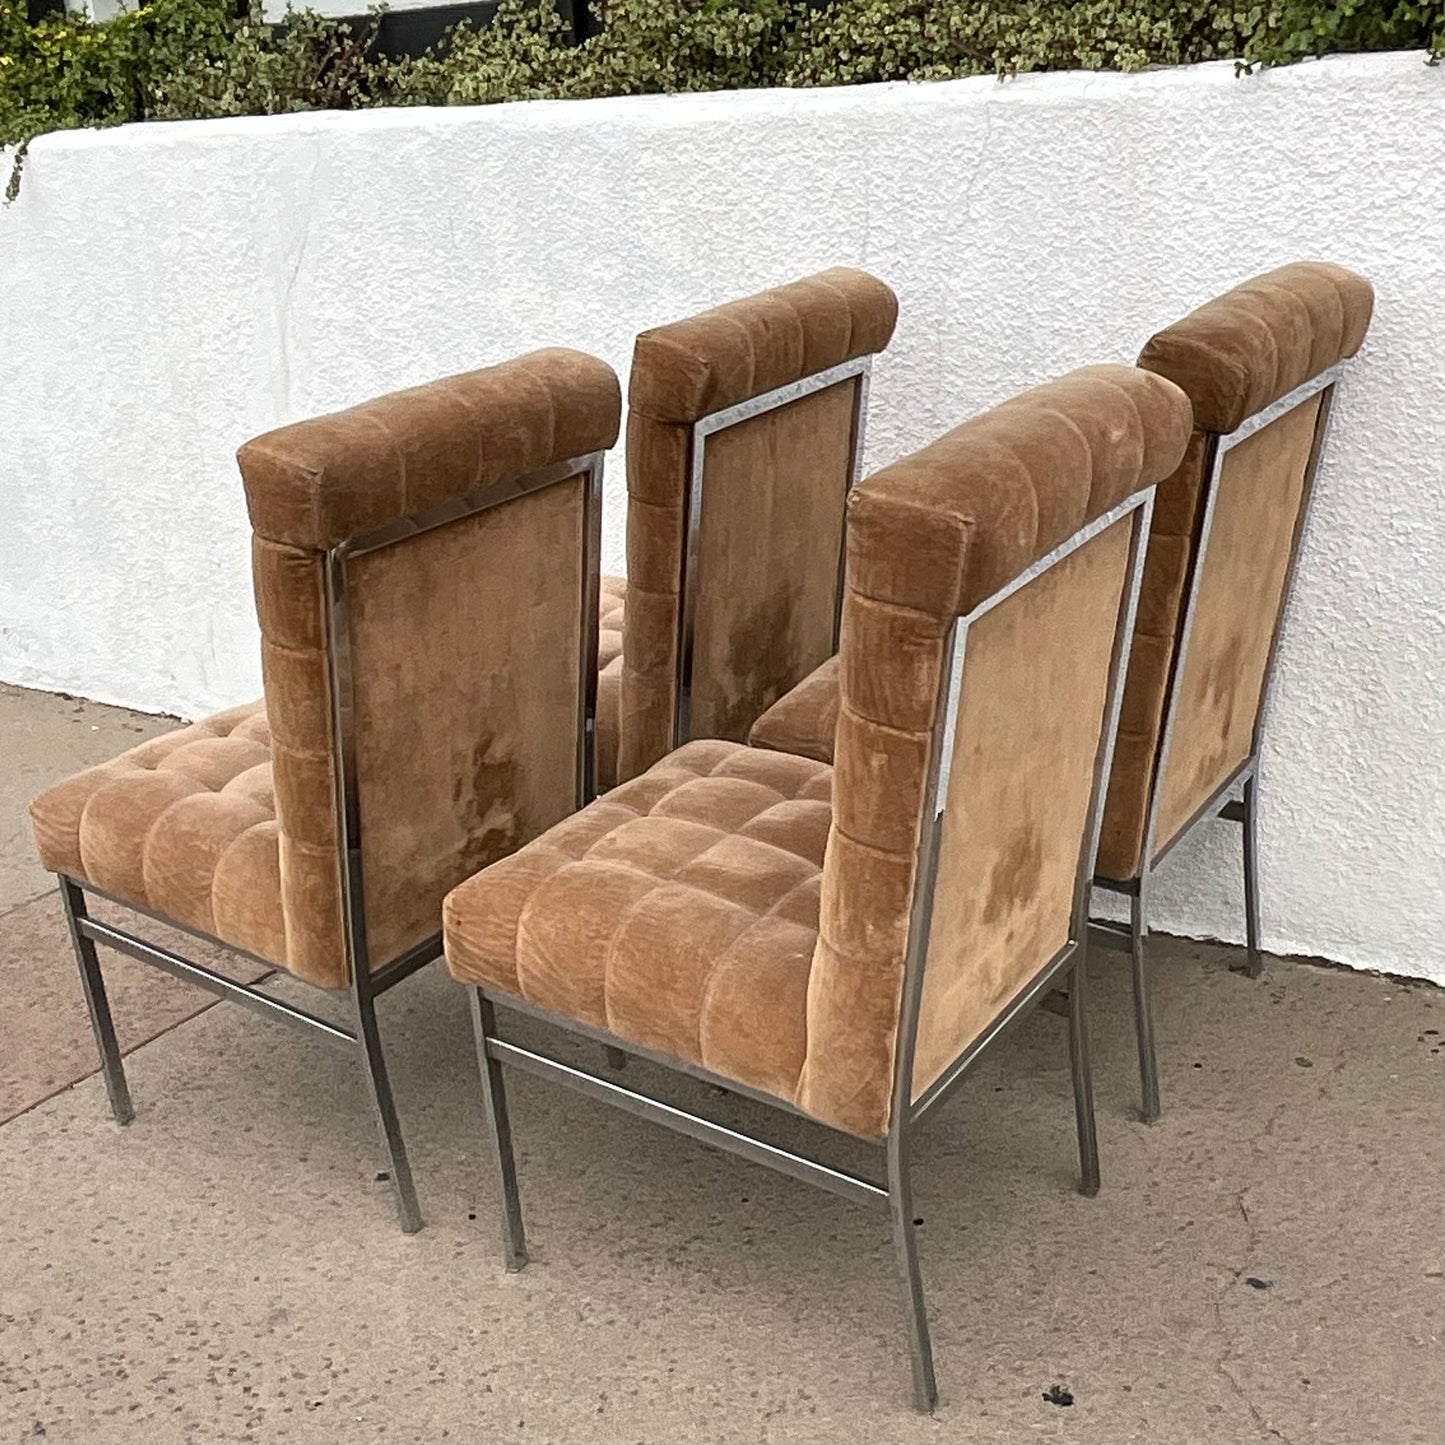 Set of 4 Pierre Cardin Dining Chairs